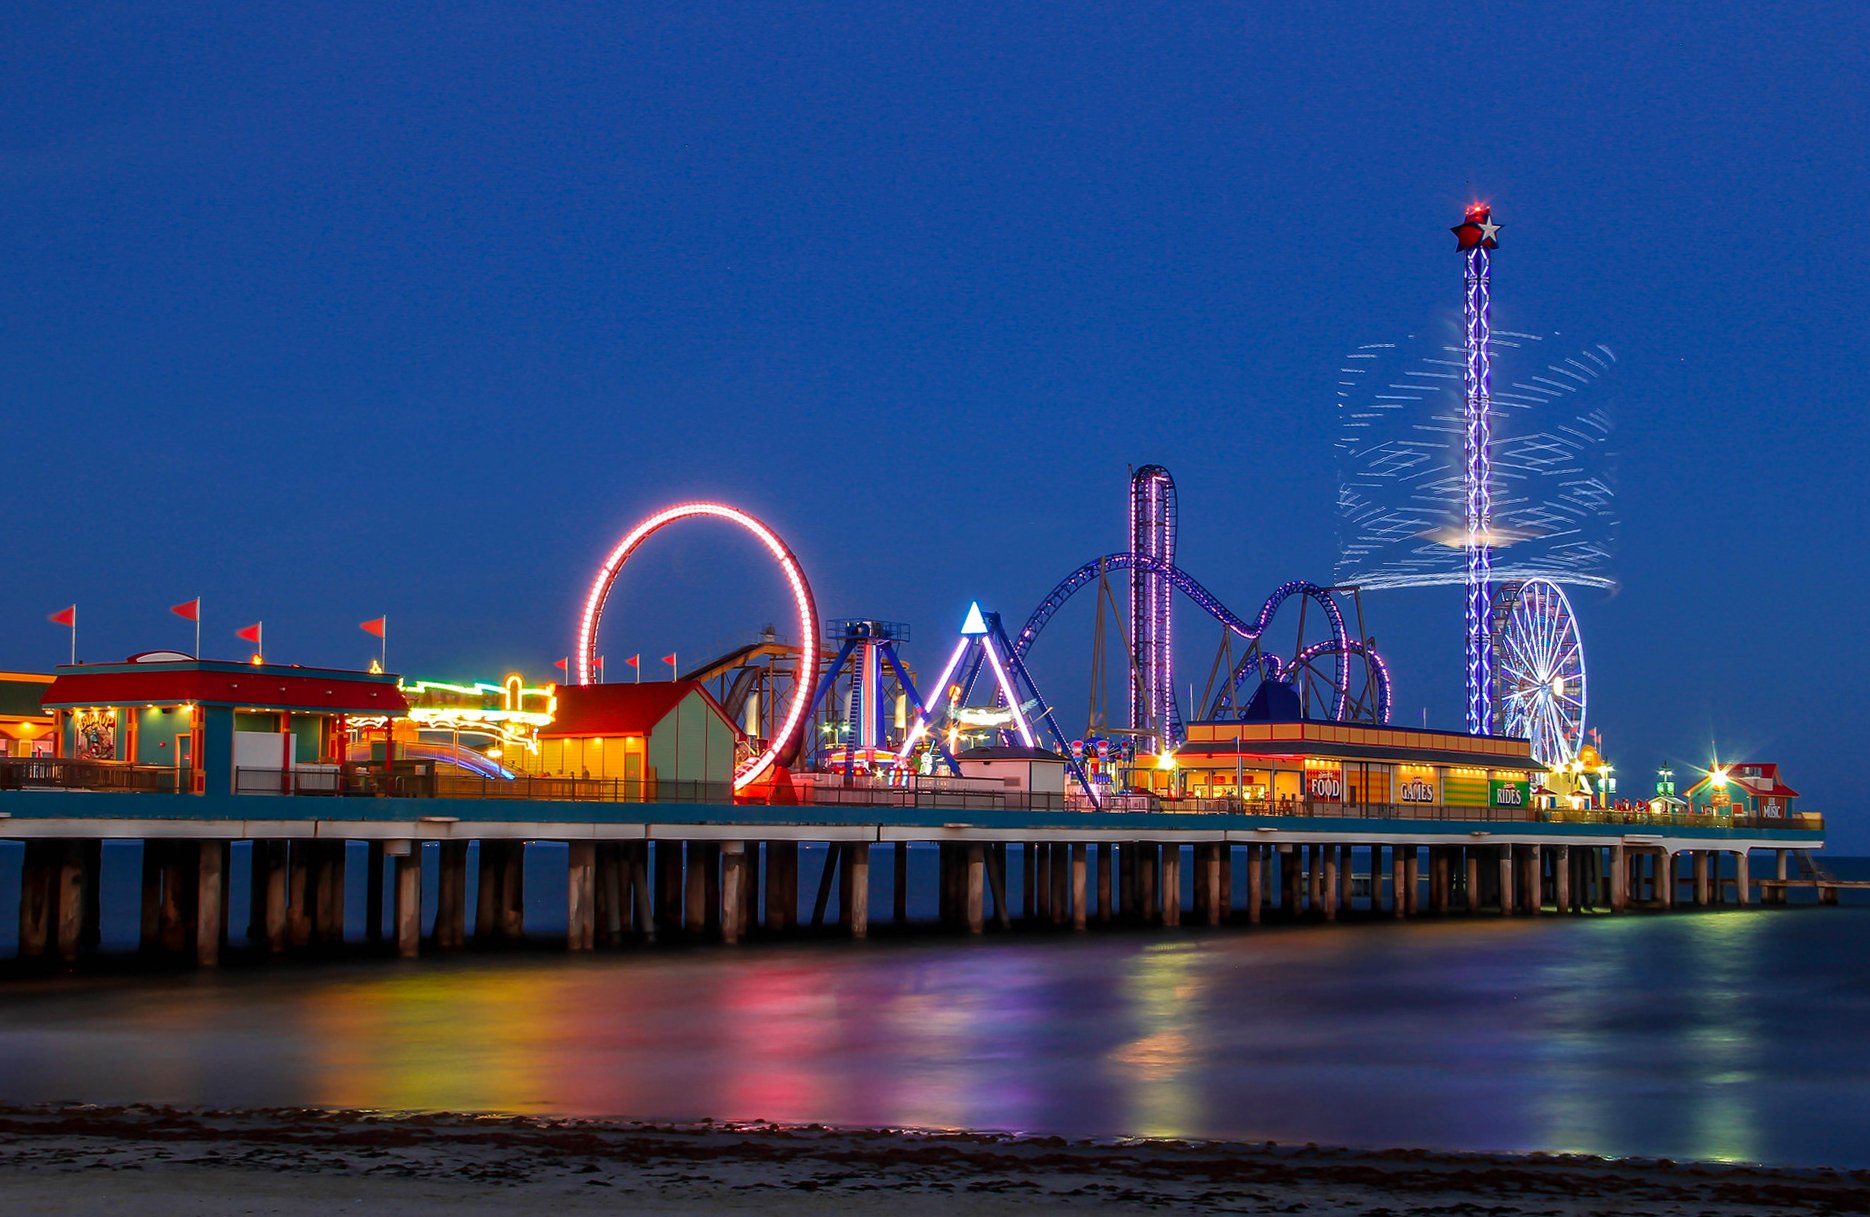 A night view of Pleasure Pier, an amusement park on a wooden pier in Galveston, Texas, with a roller coaster, a Ferris wheel, and a drop tower illuminated by colorful lights against a dark blue sky and ocean.